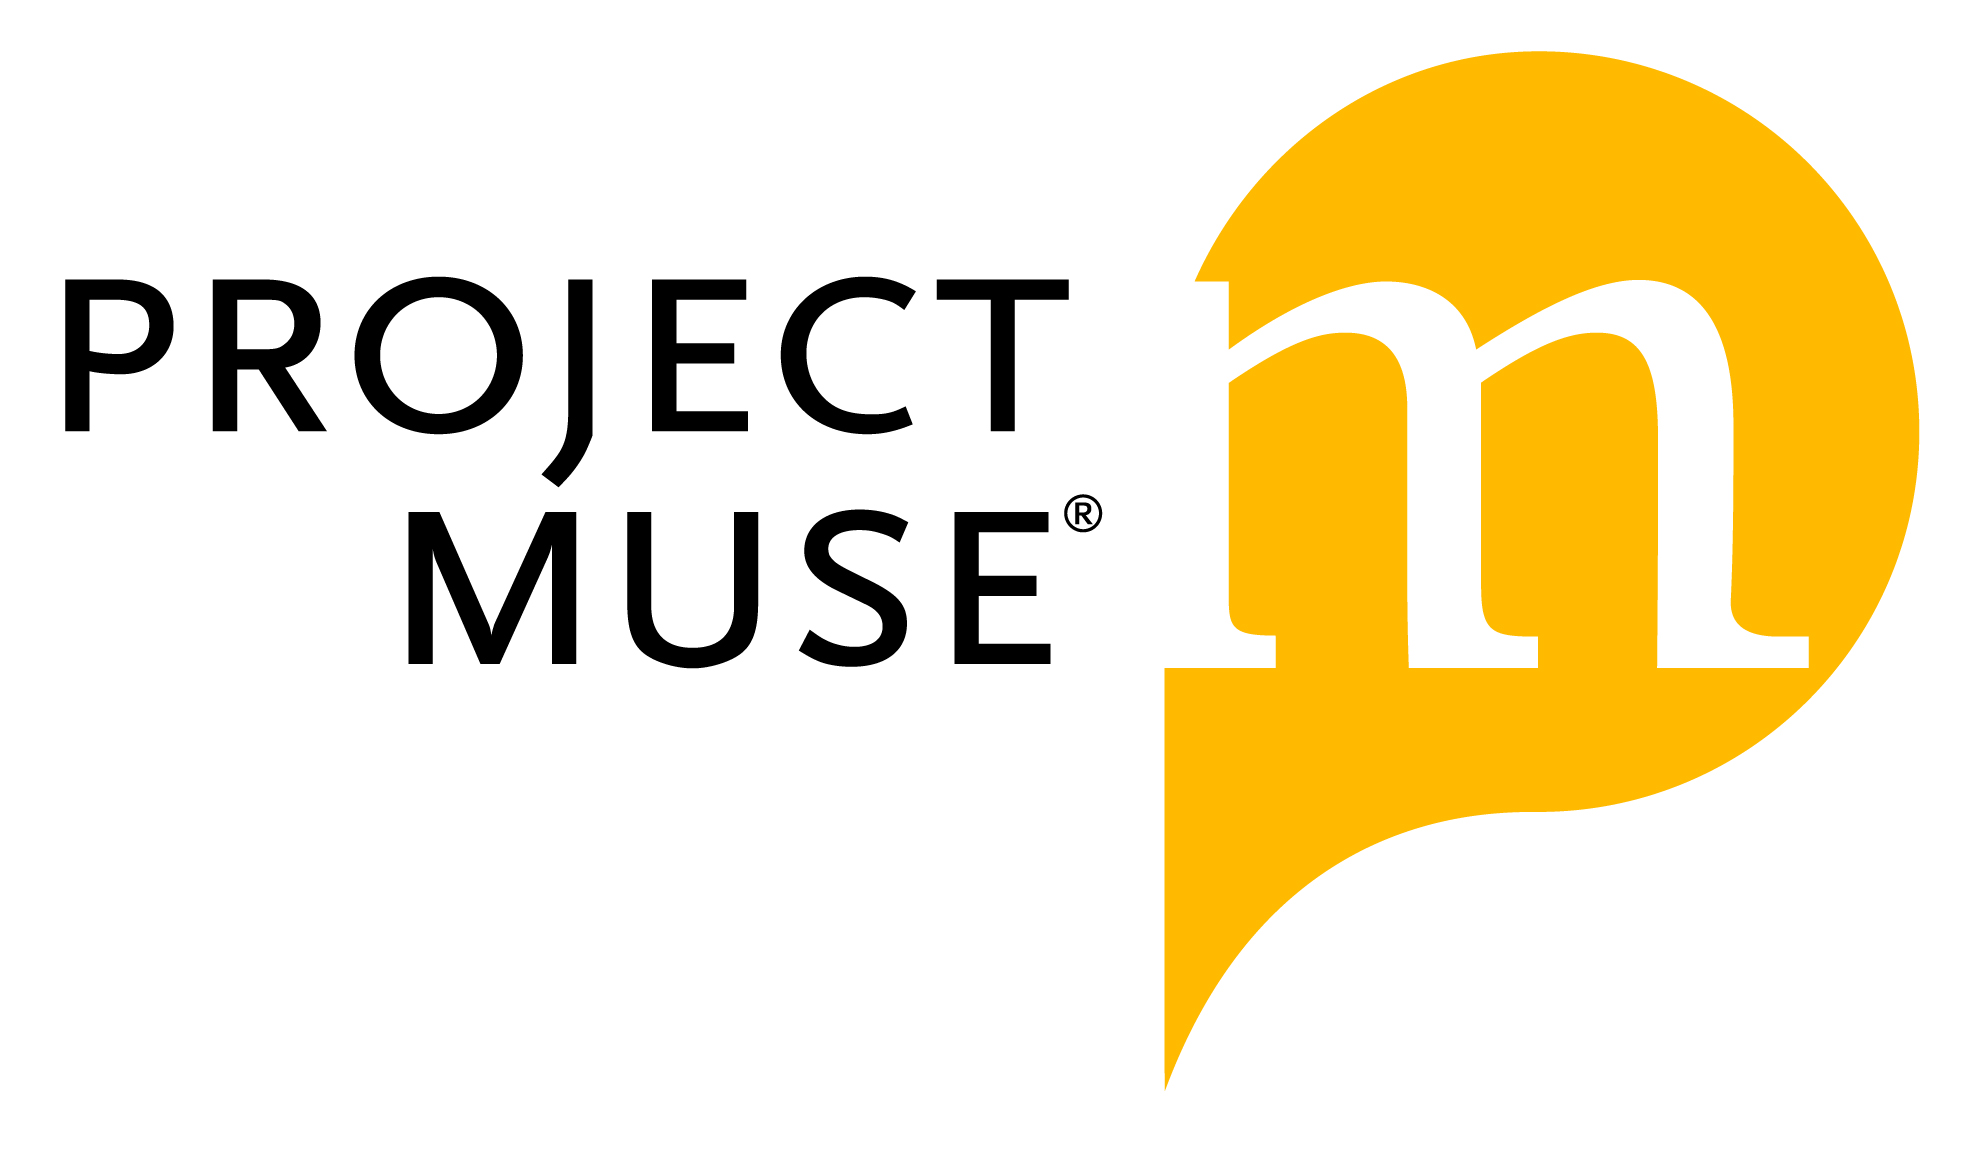 Project MUSE (PMUSE)